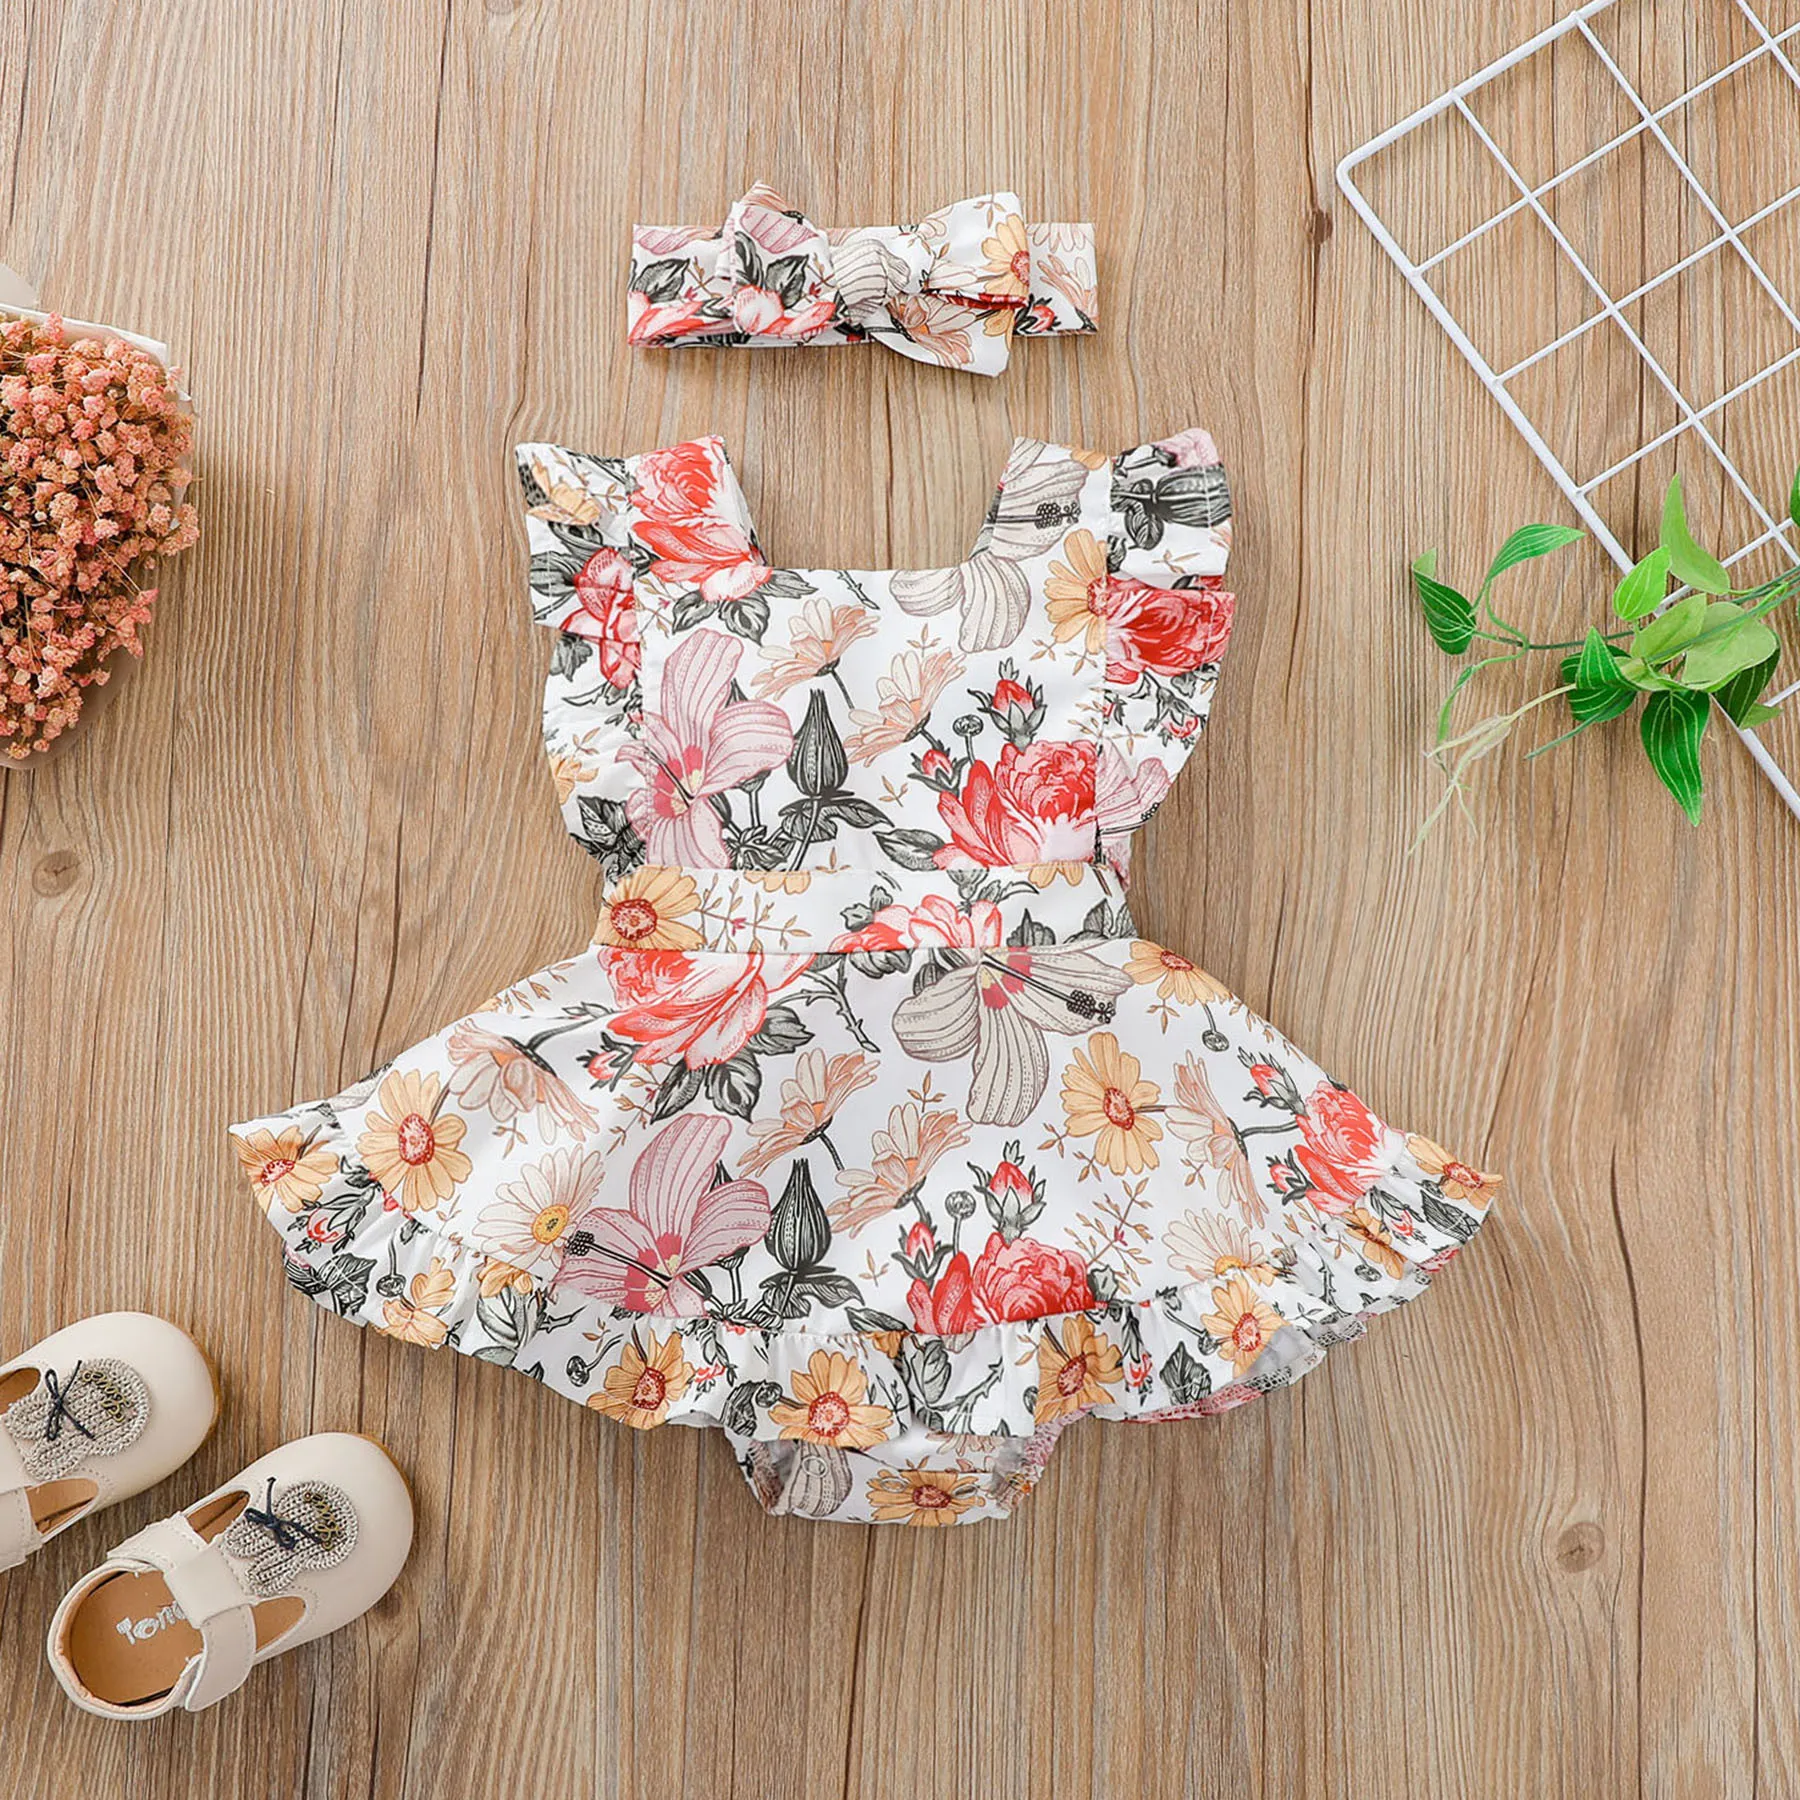 

Wholesale newborn Baby girls dress jumpsuit ruffled floral printed sleeveless rompers and headband for babies, Picture shows